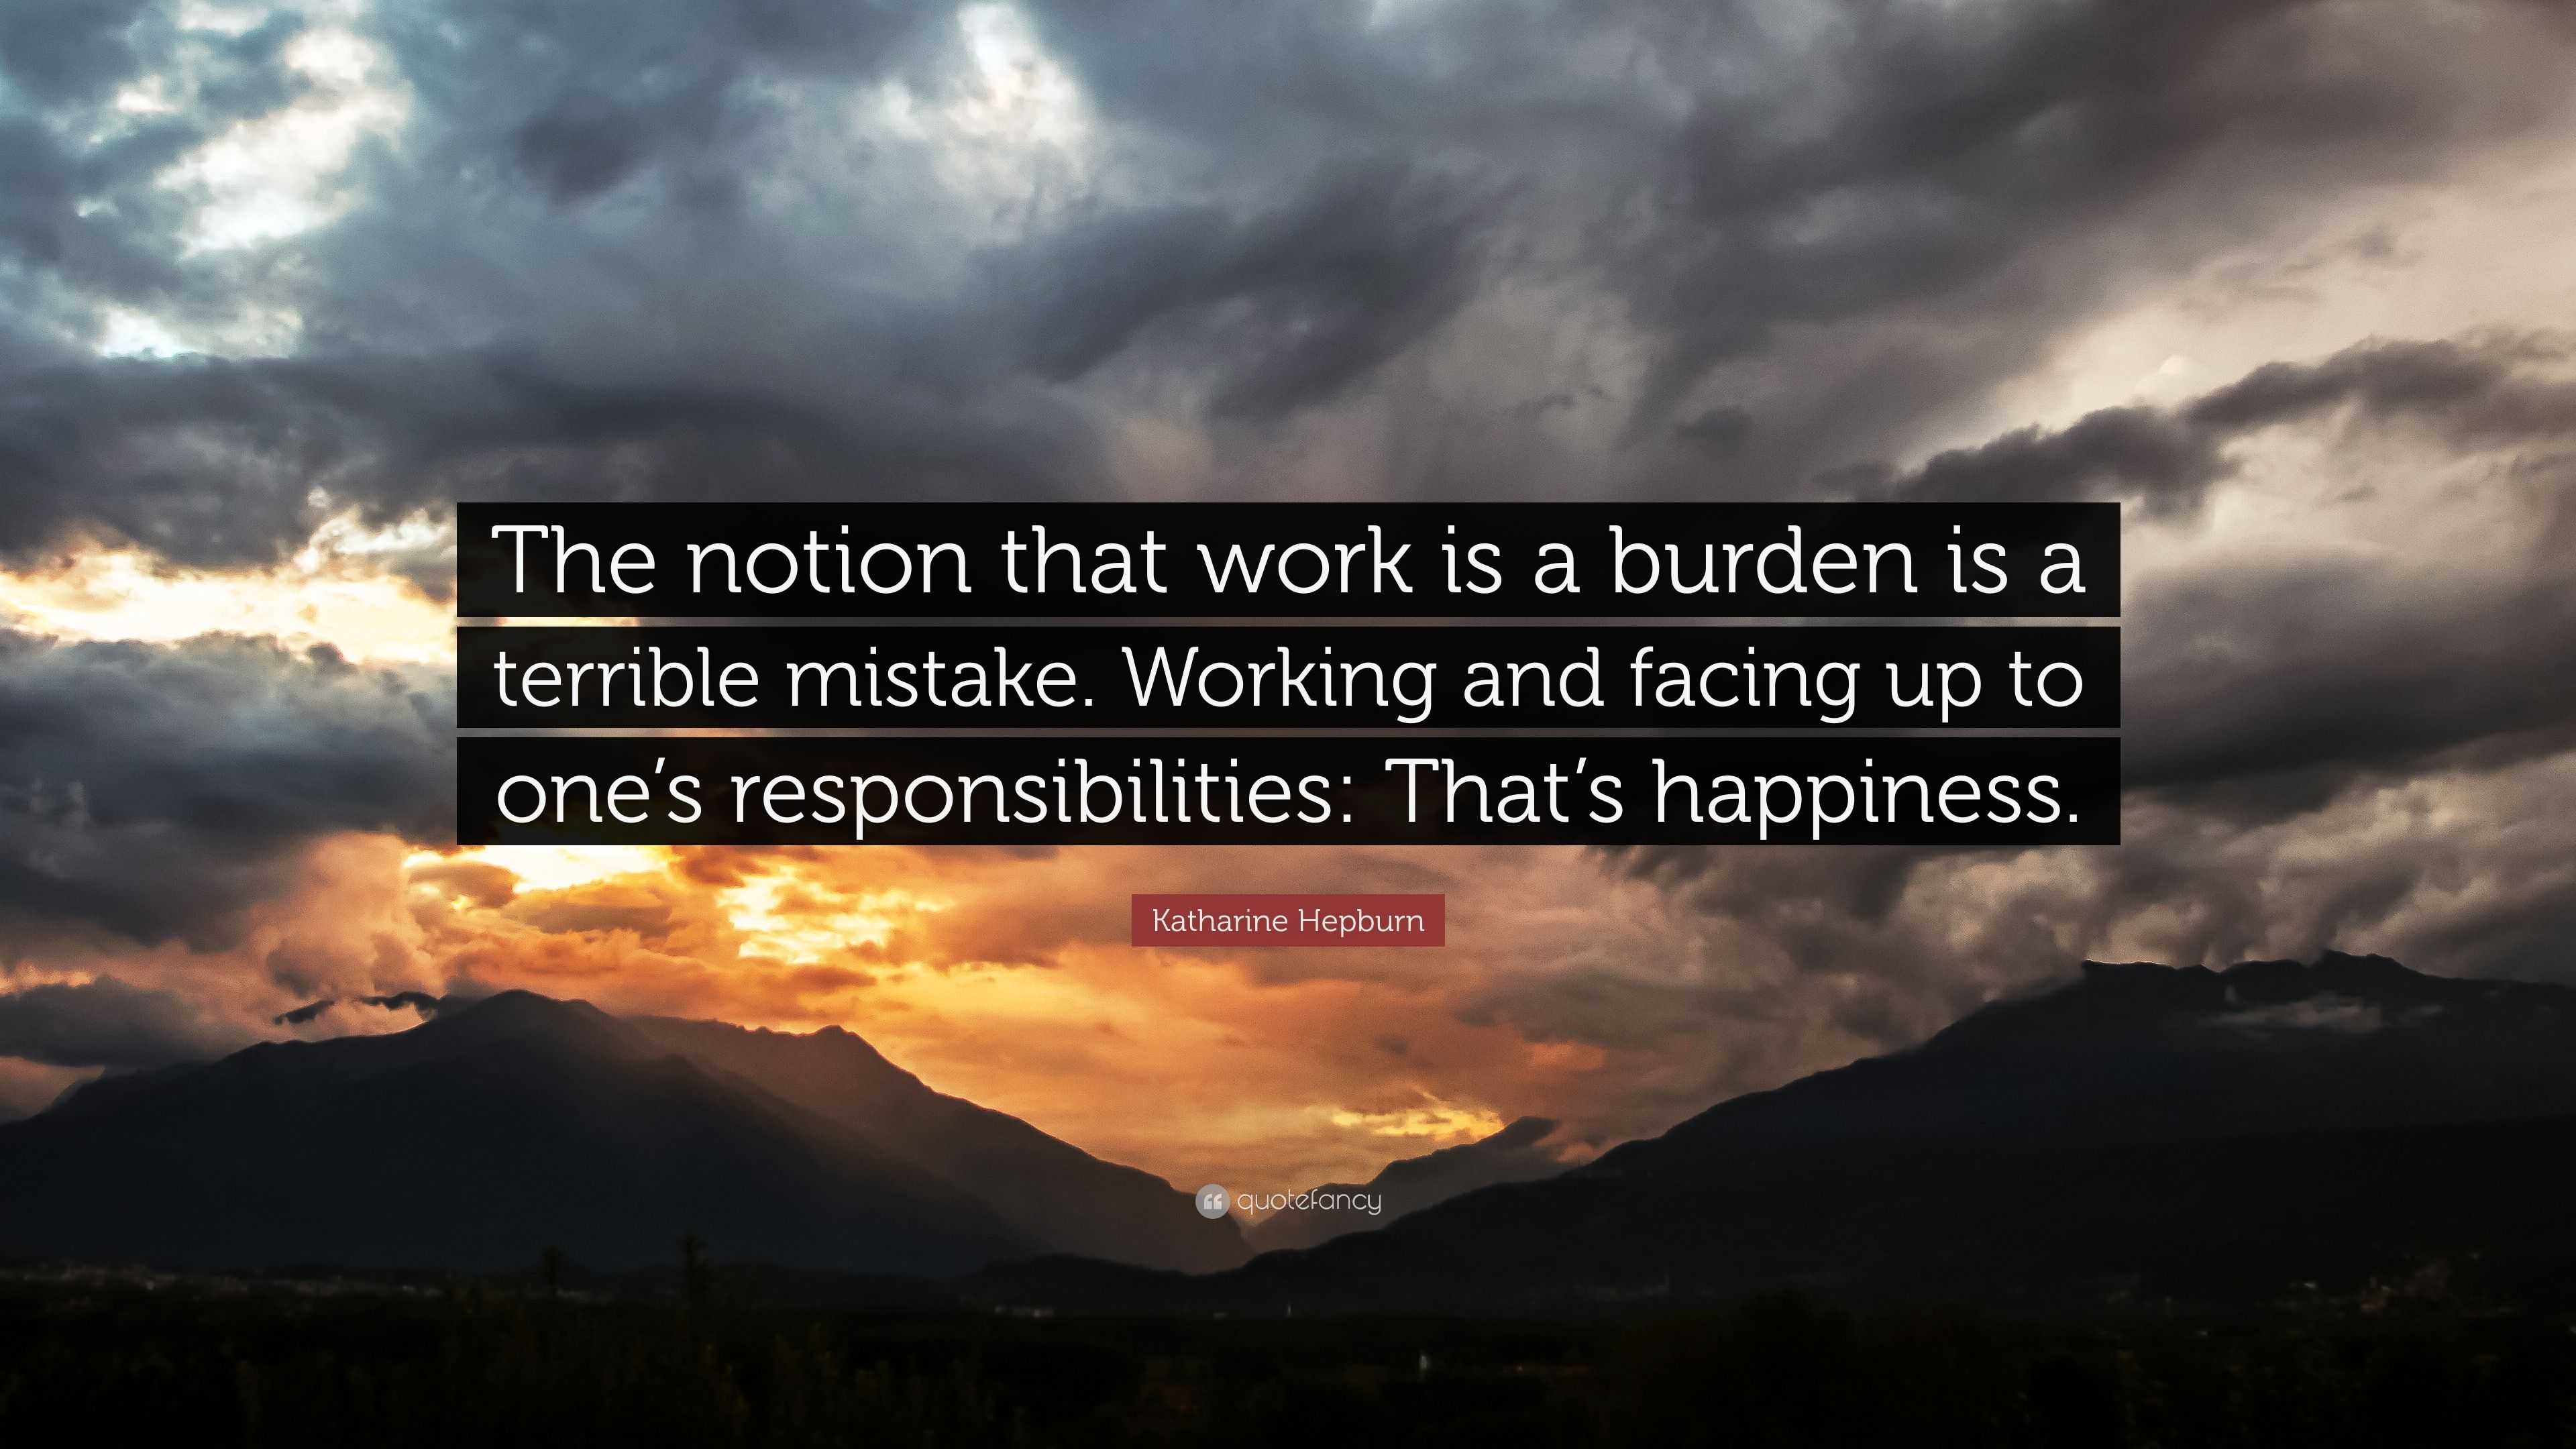 Katharine Hepburn Quote: “The notion that work is a burden is a ...